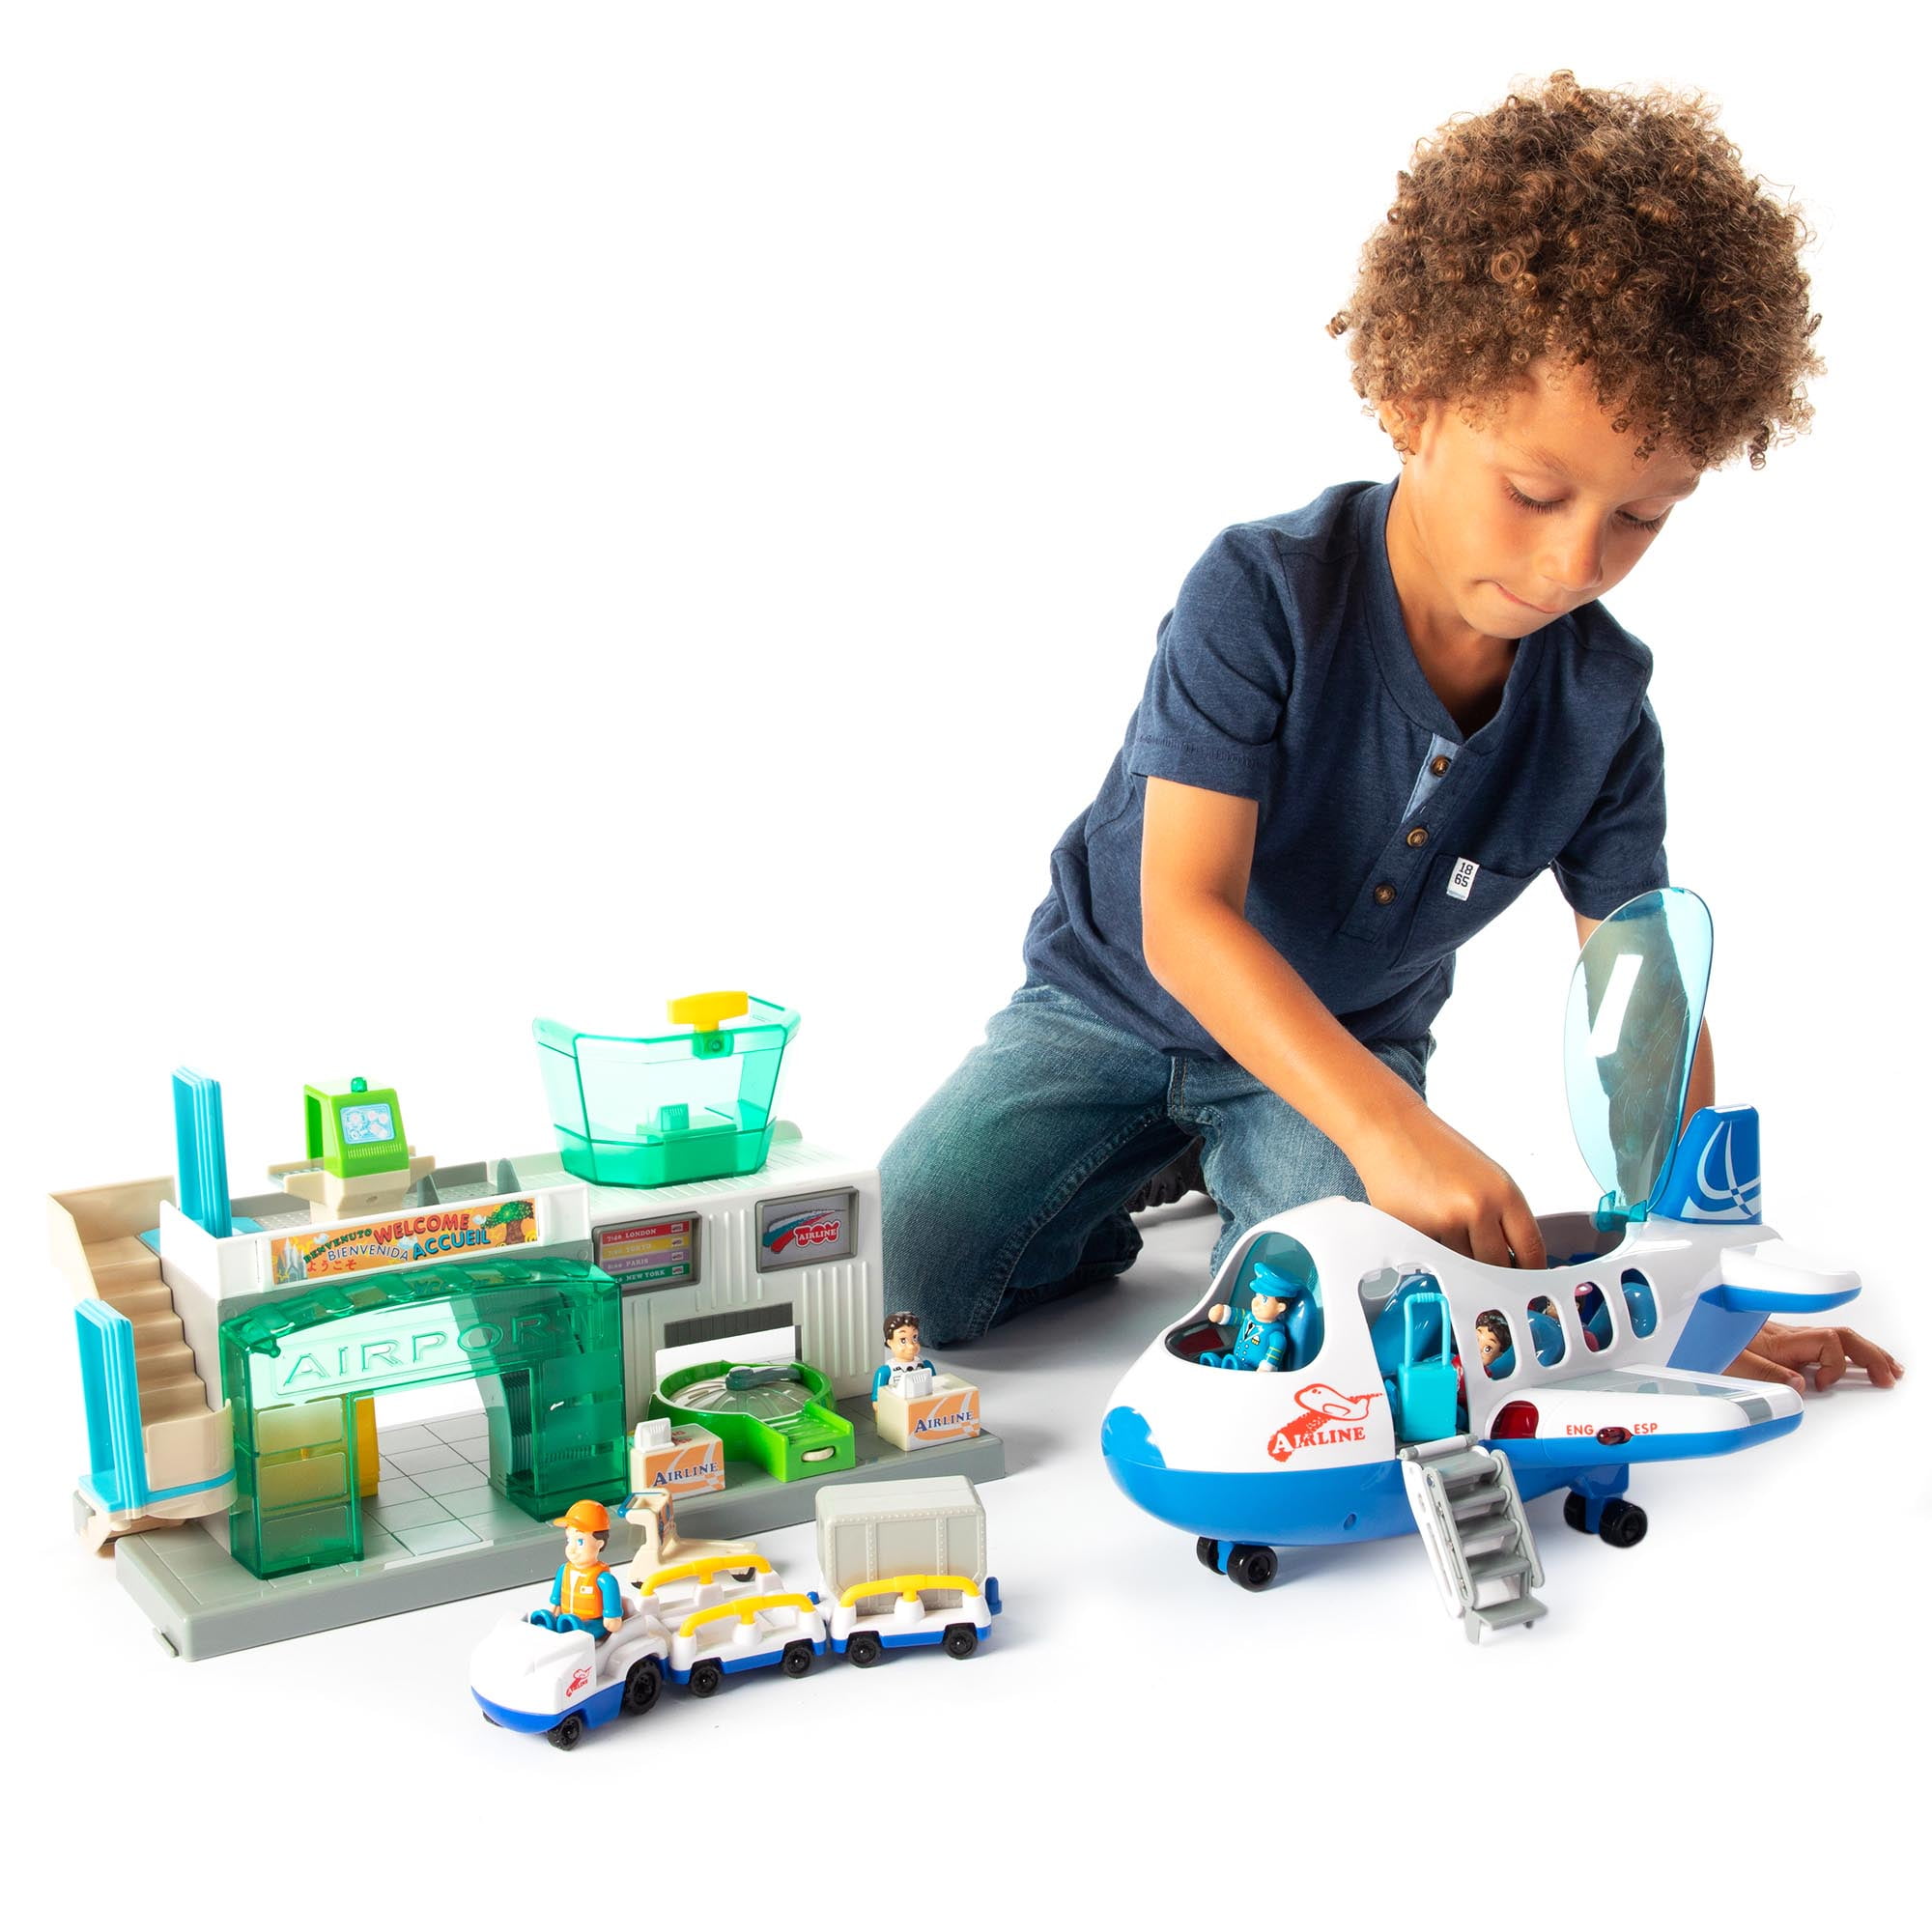 AIRPORT PLAY SET FOR KIDS BRAND NEW 